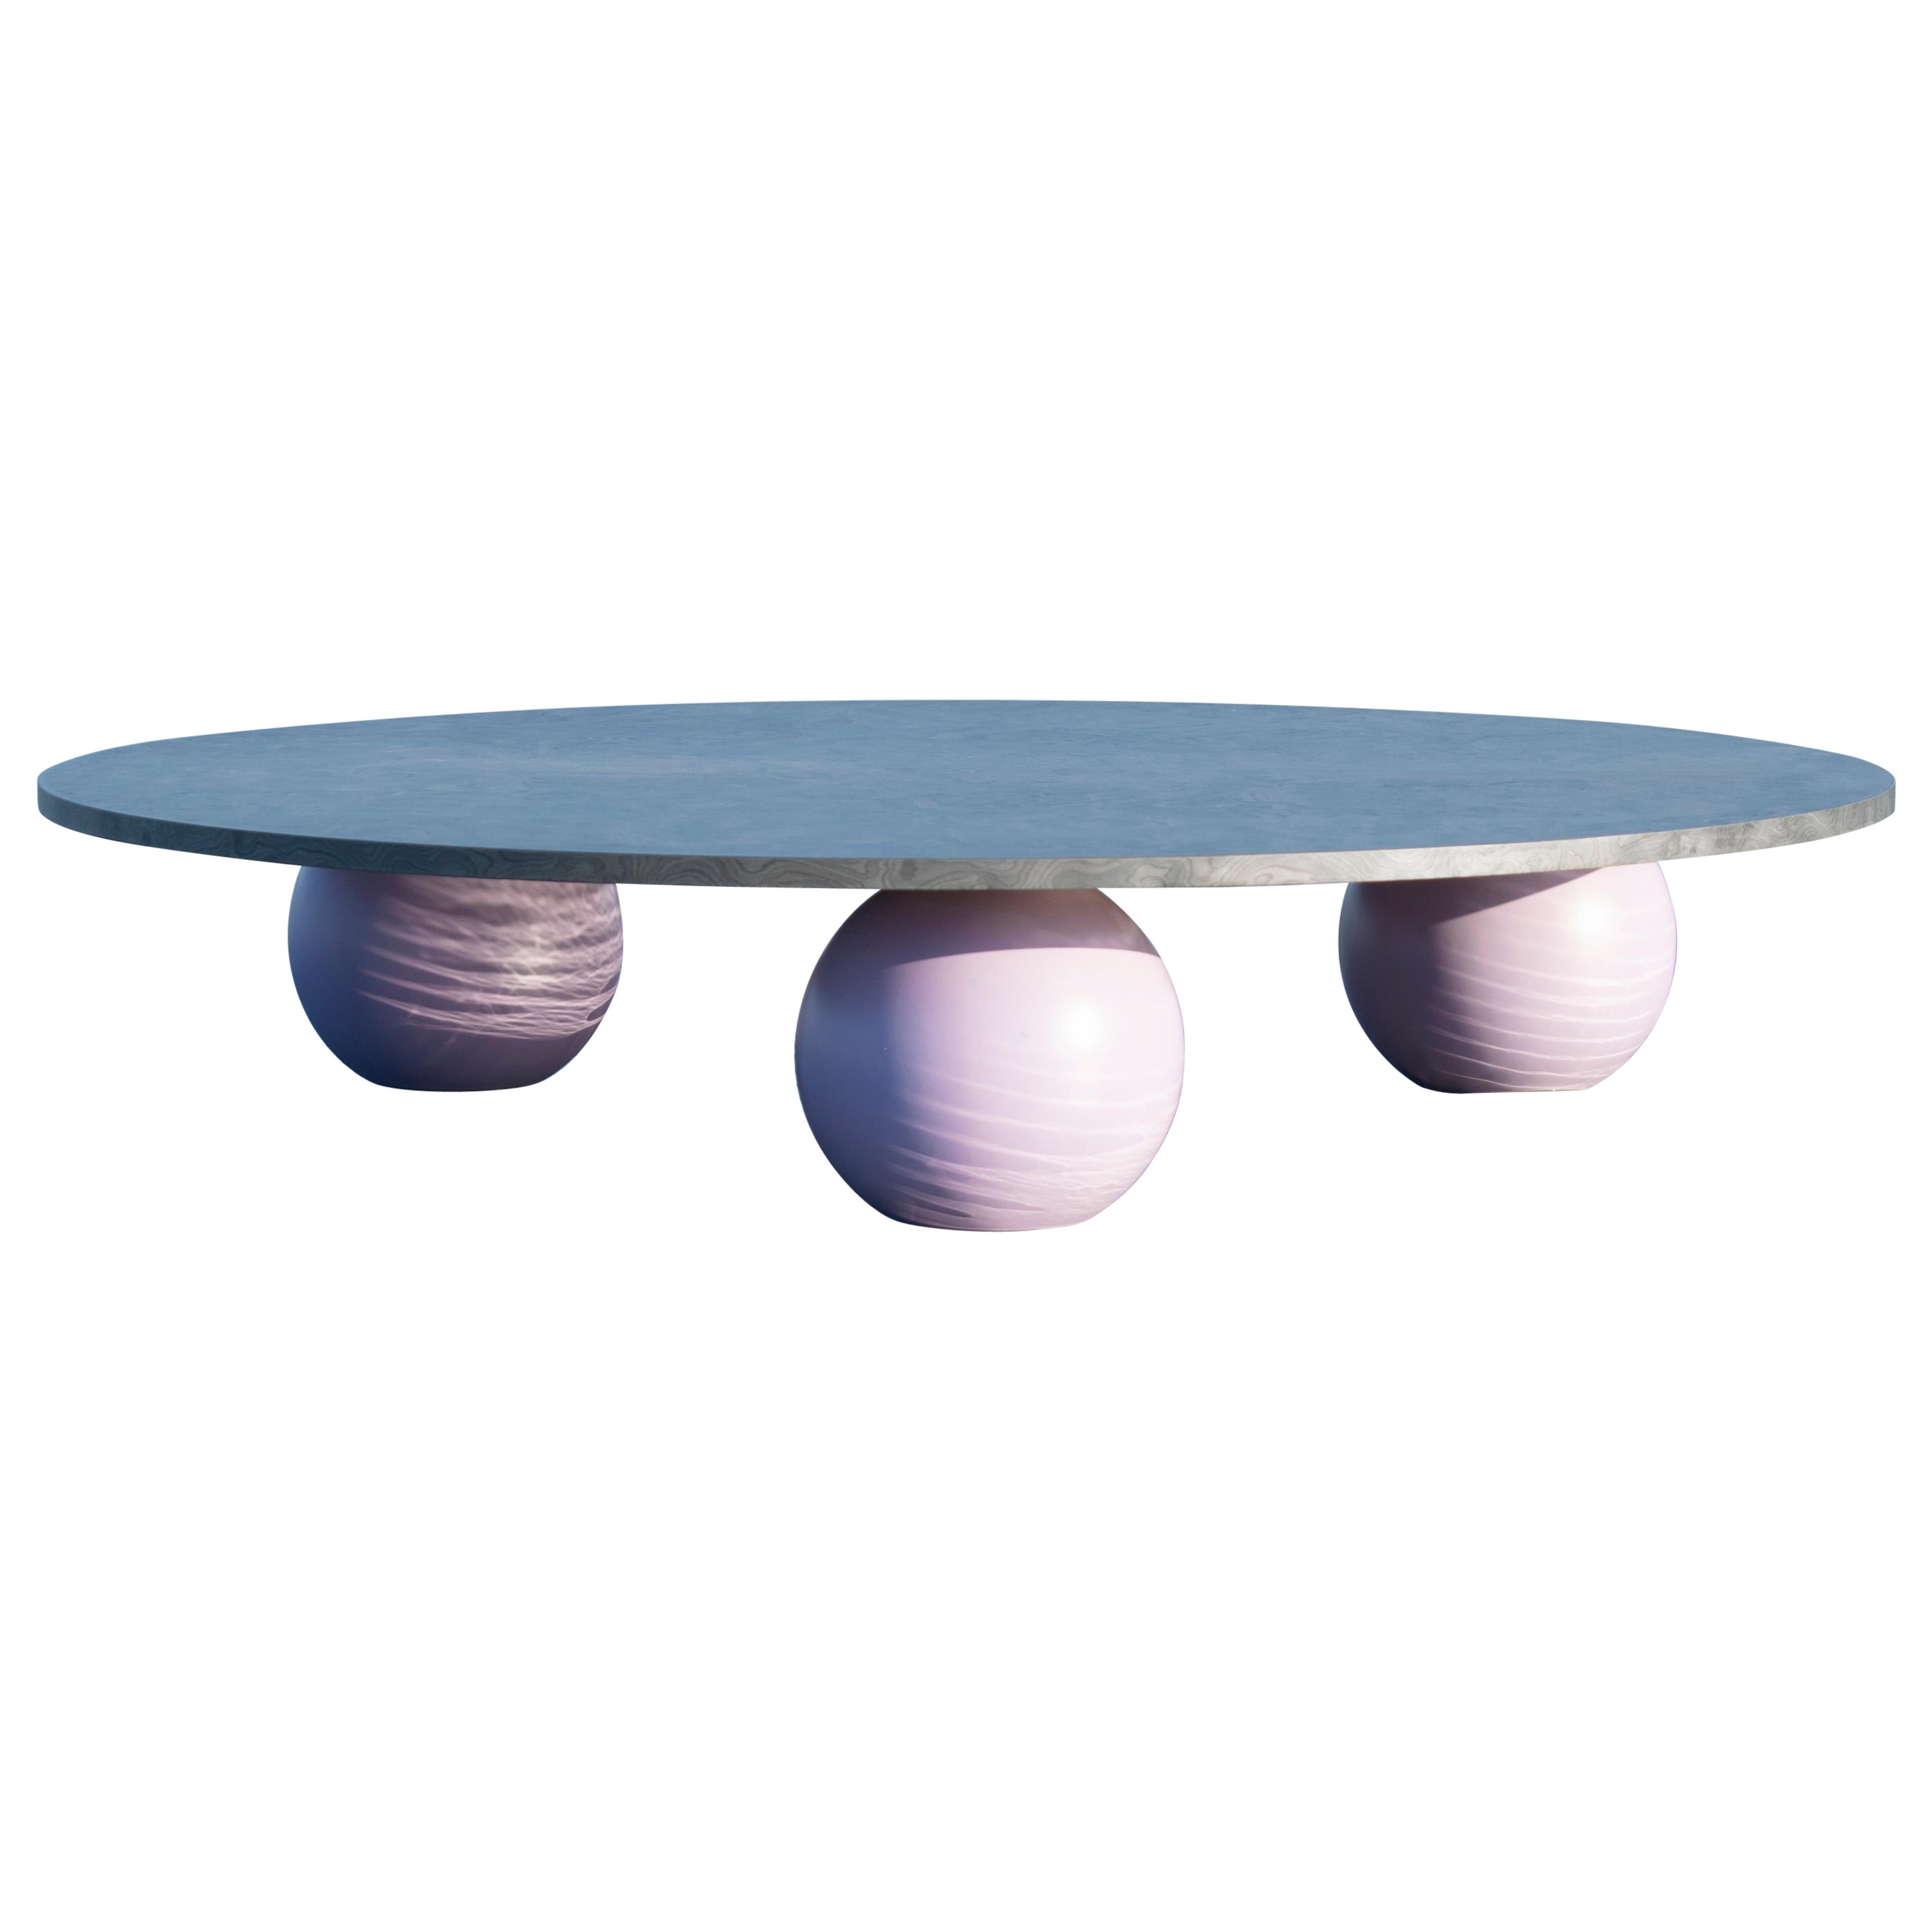 SEA SURFACE Coffee Table Silver Veneer and Solid Wood Lilac Spheres